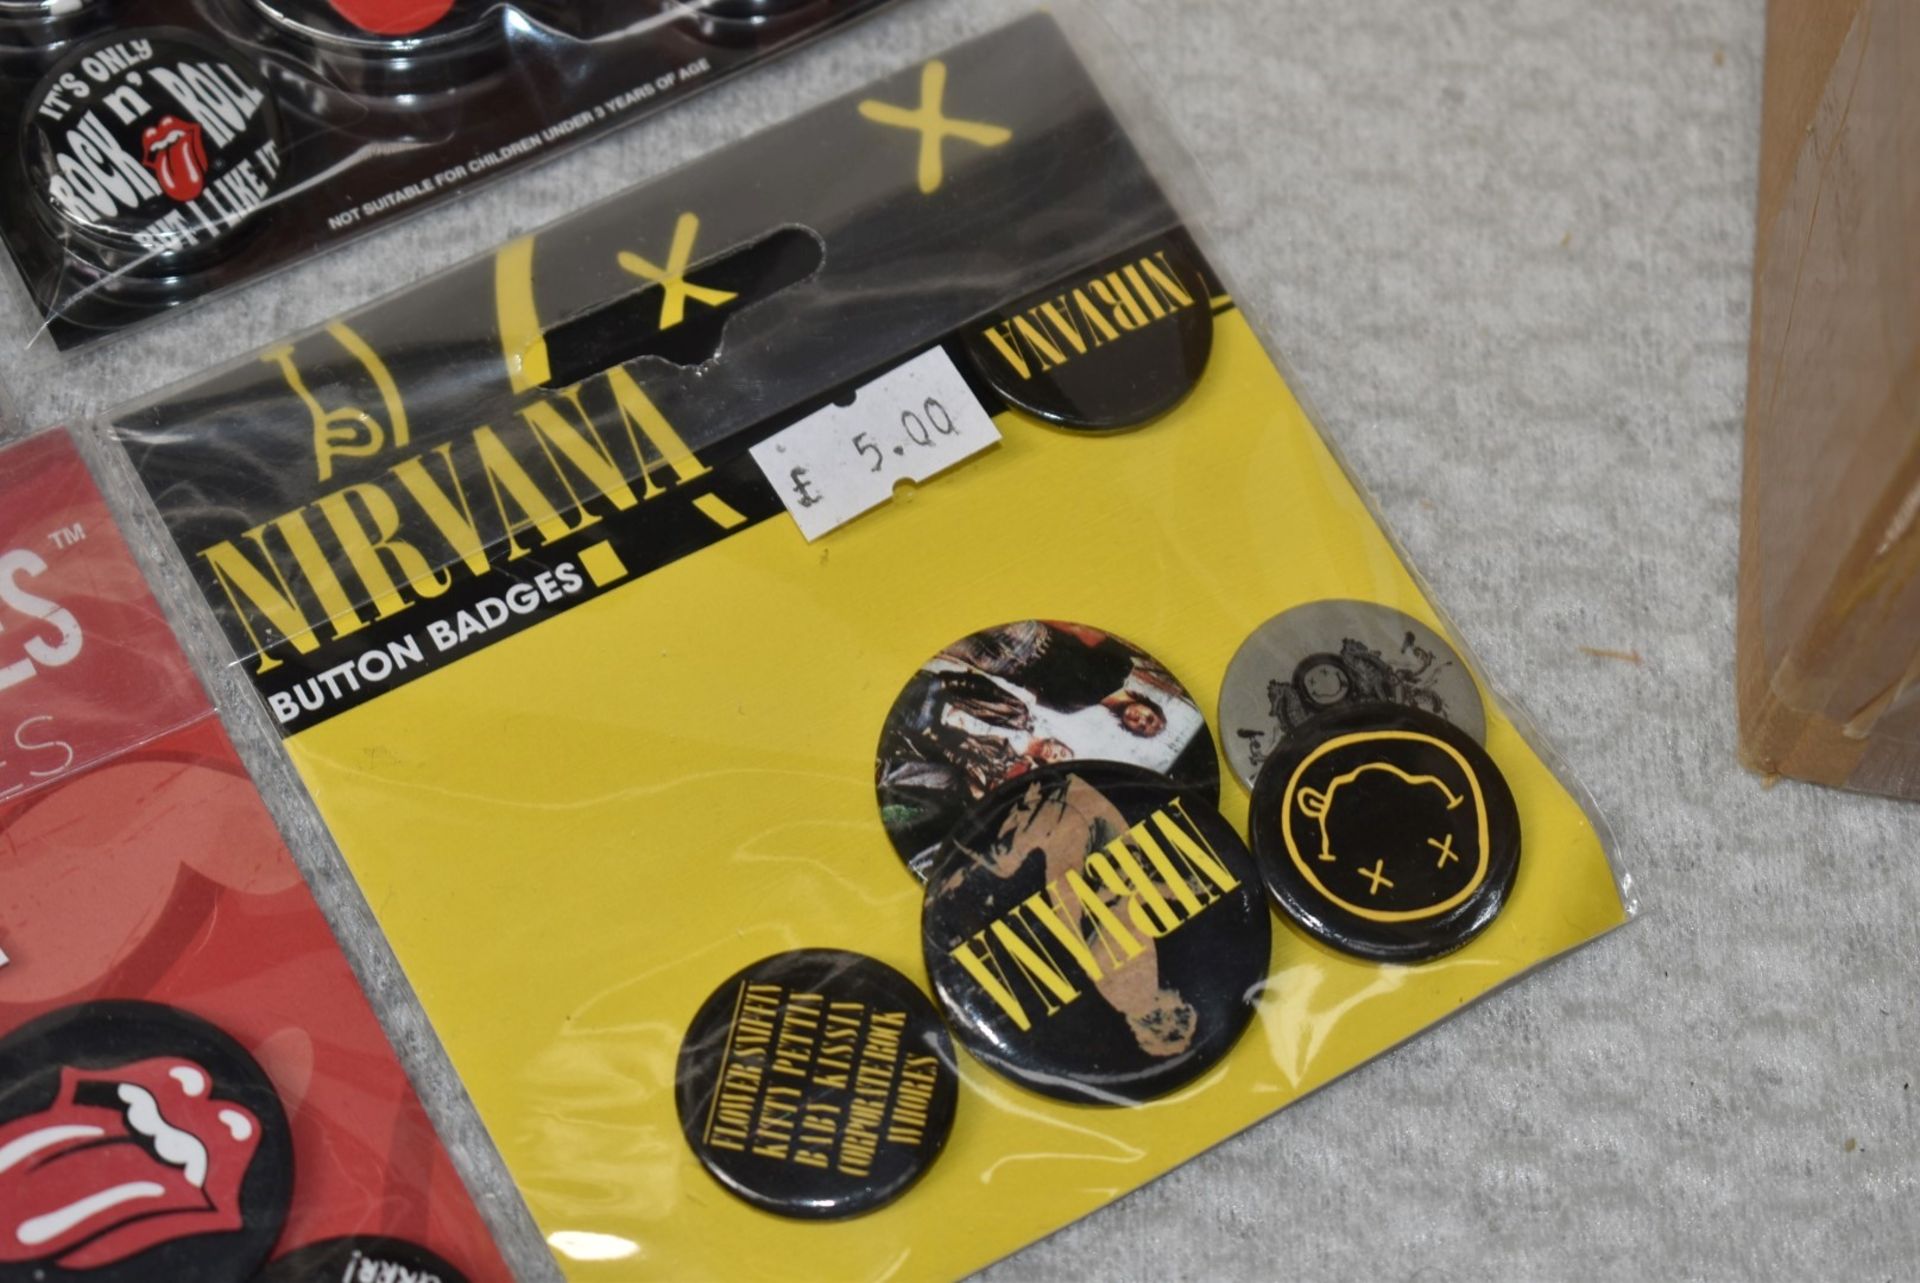 Approx 70 x Various Button Badge Multipack Sets - Rolling Stones, Nirvana, Guns n Roses, David - Image 7 of 9